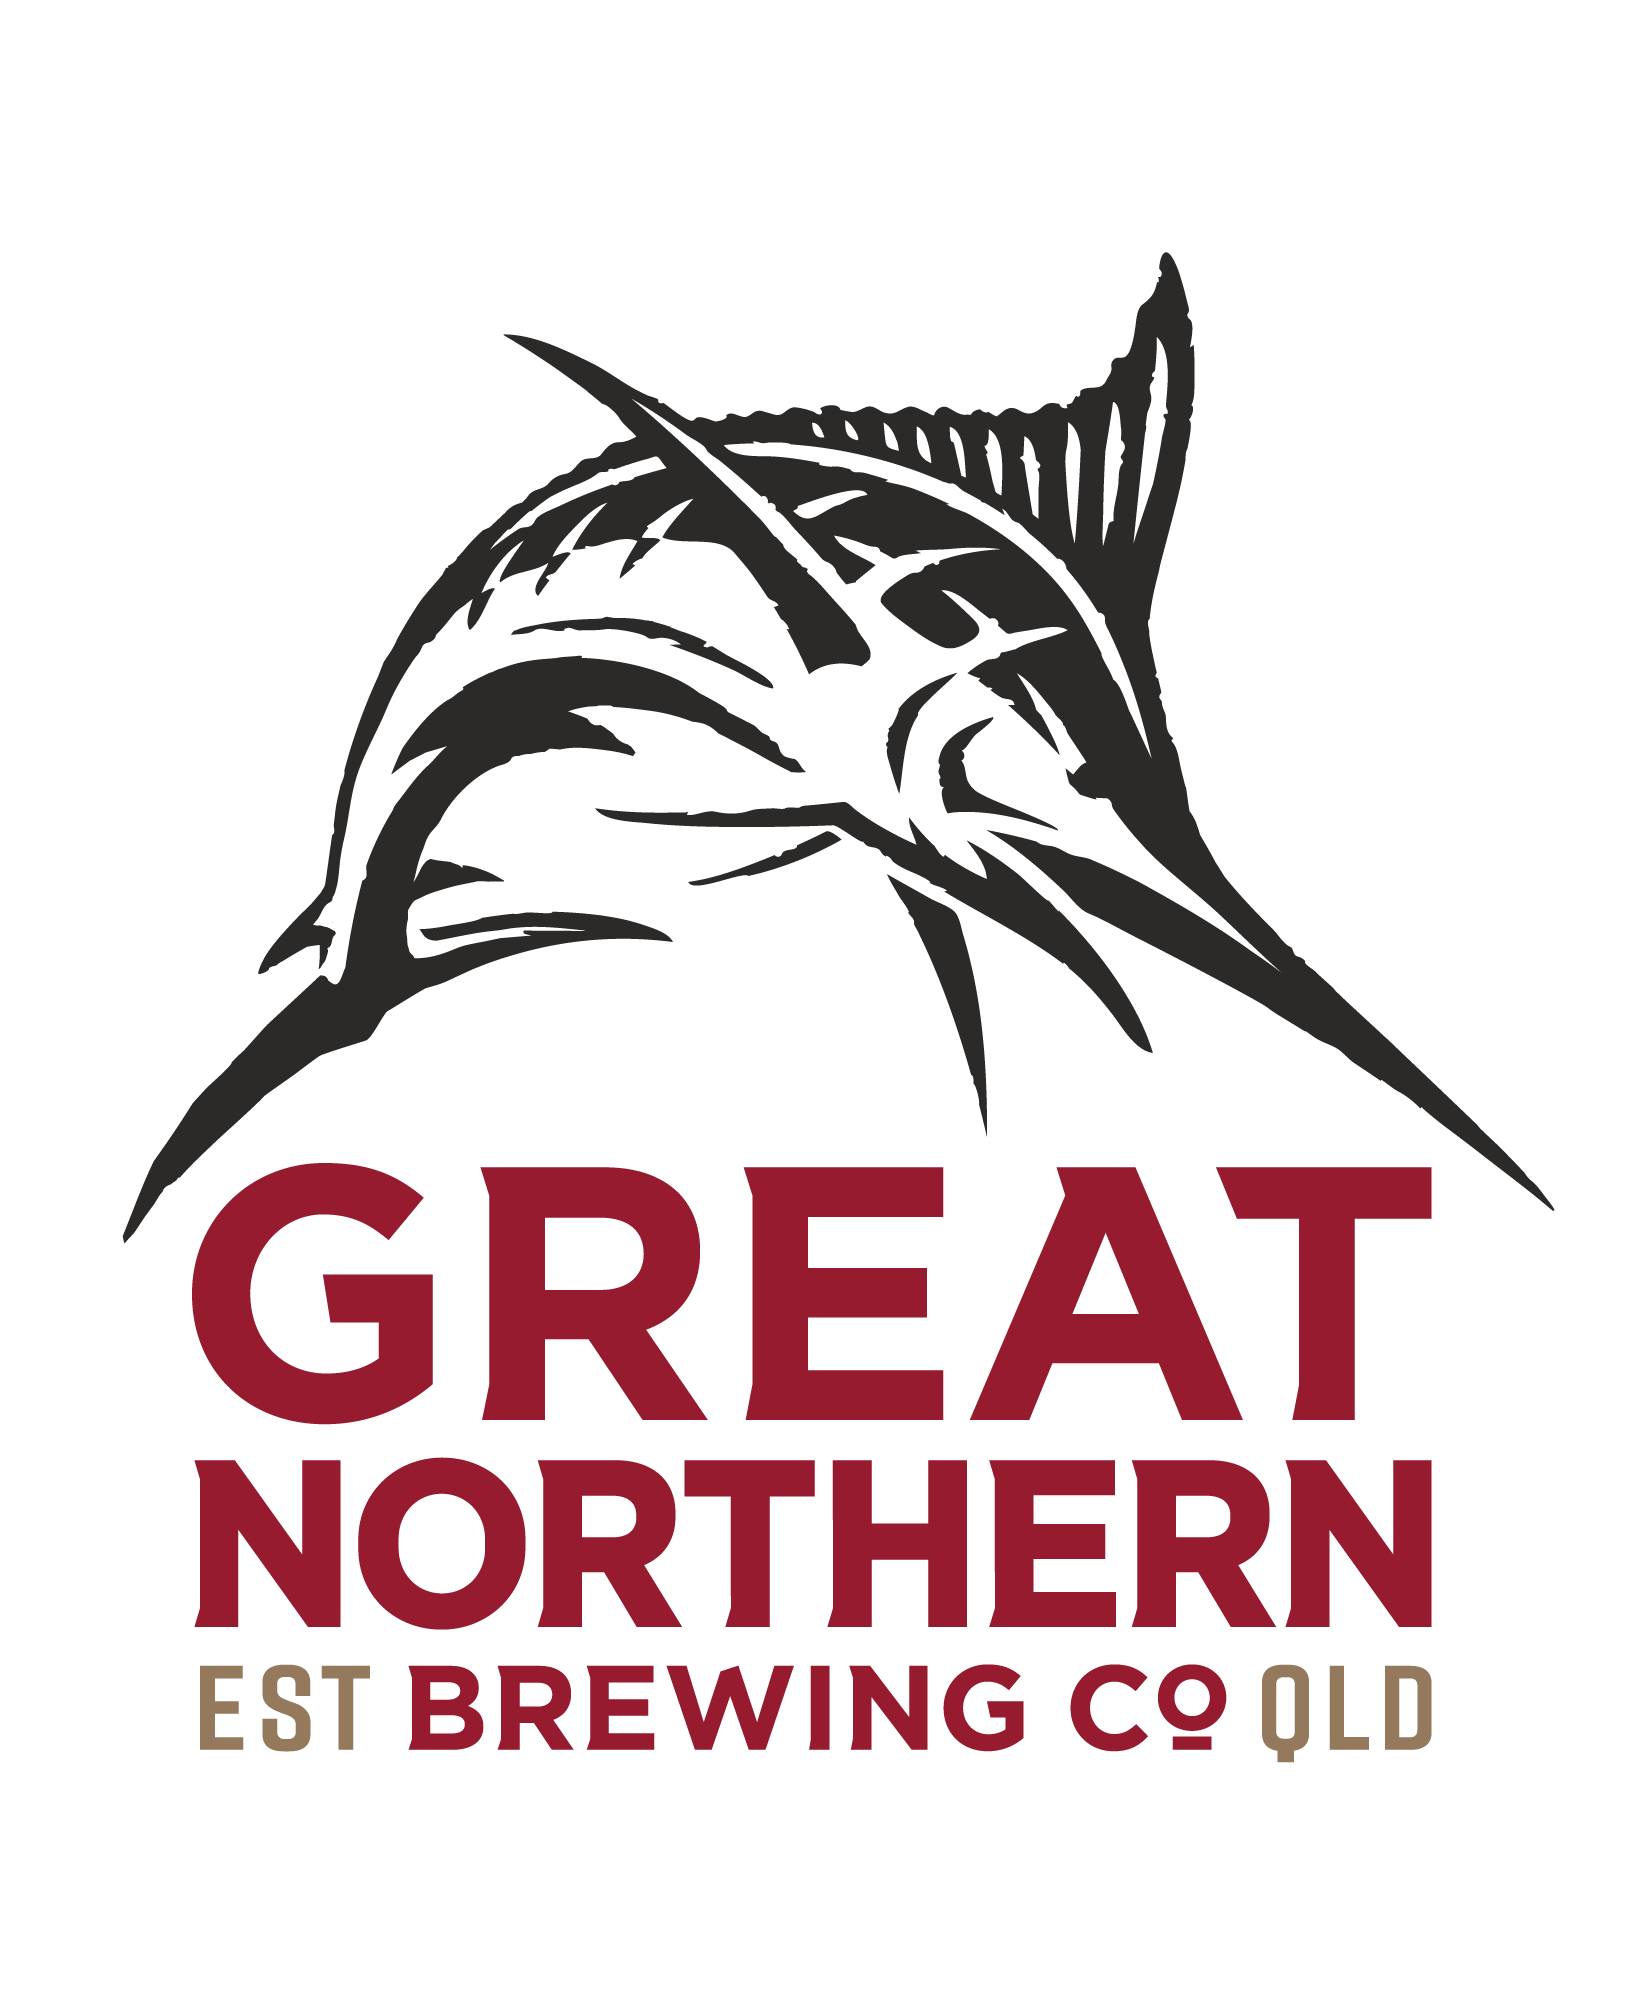 Great Northern Brewing Co.